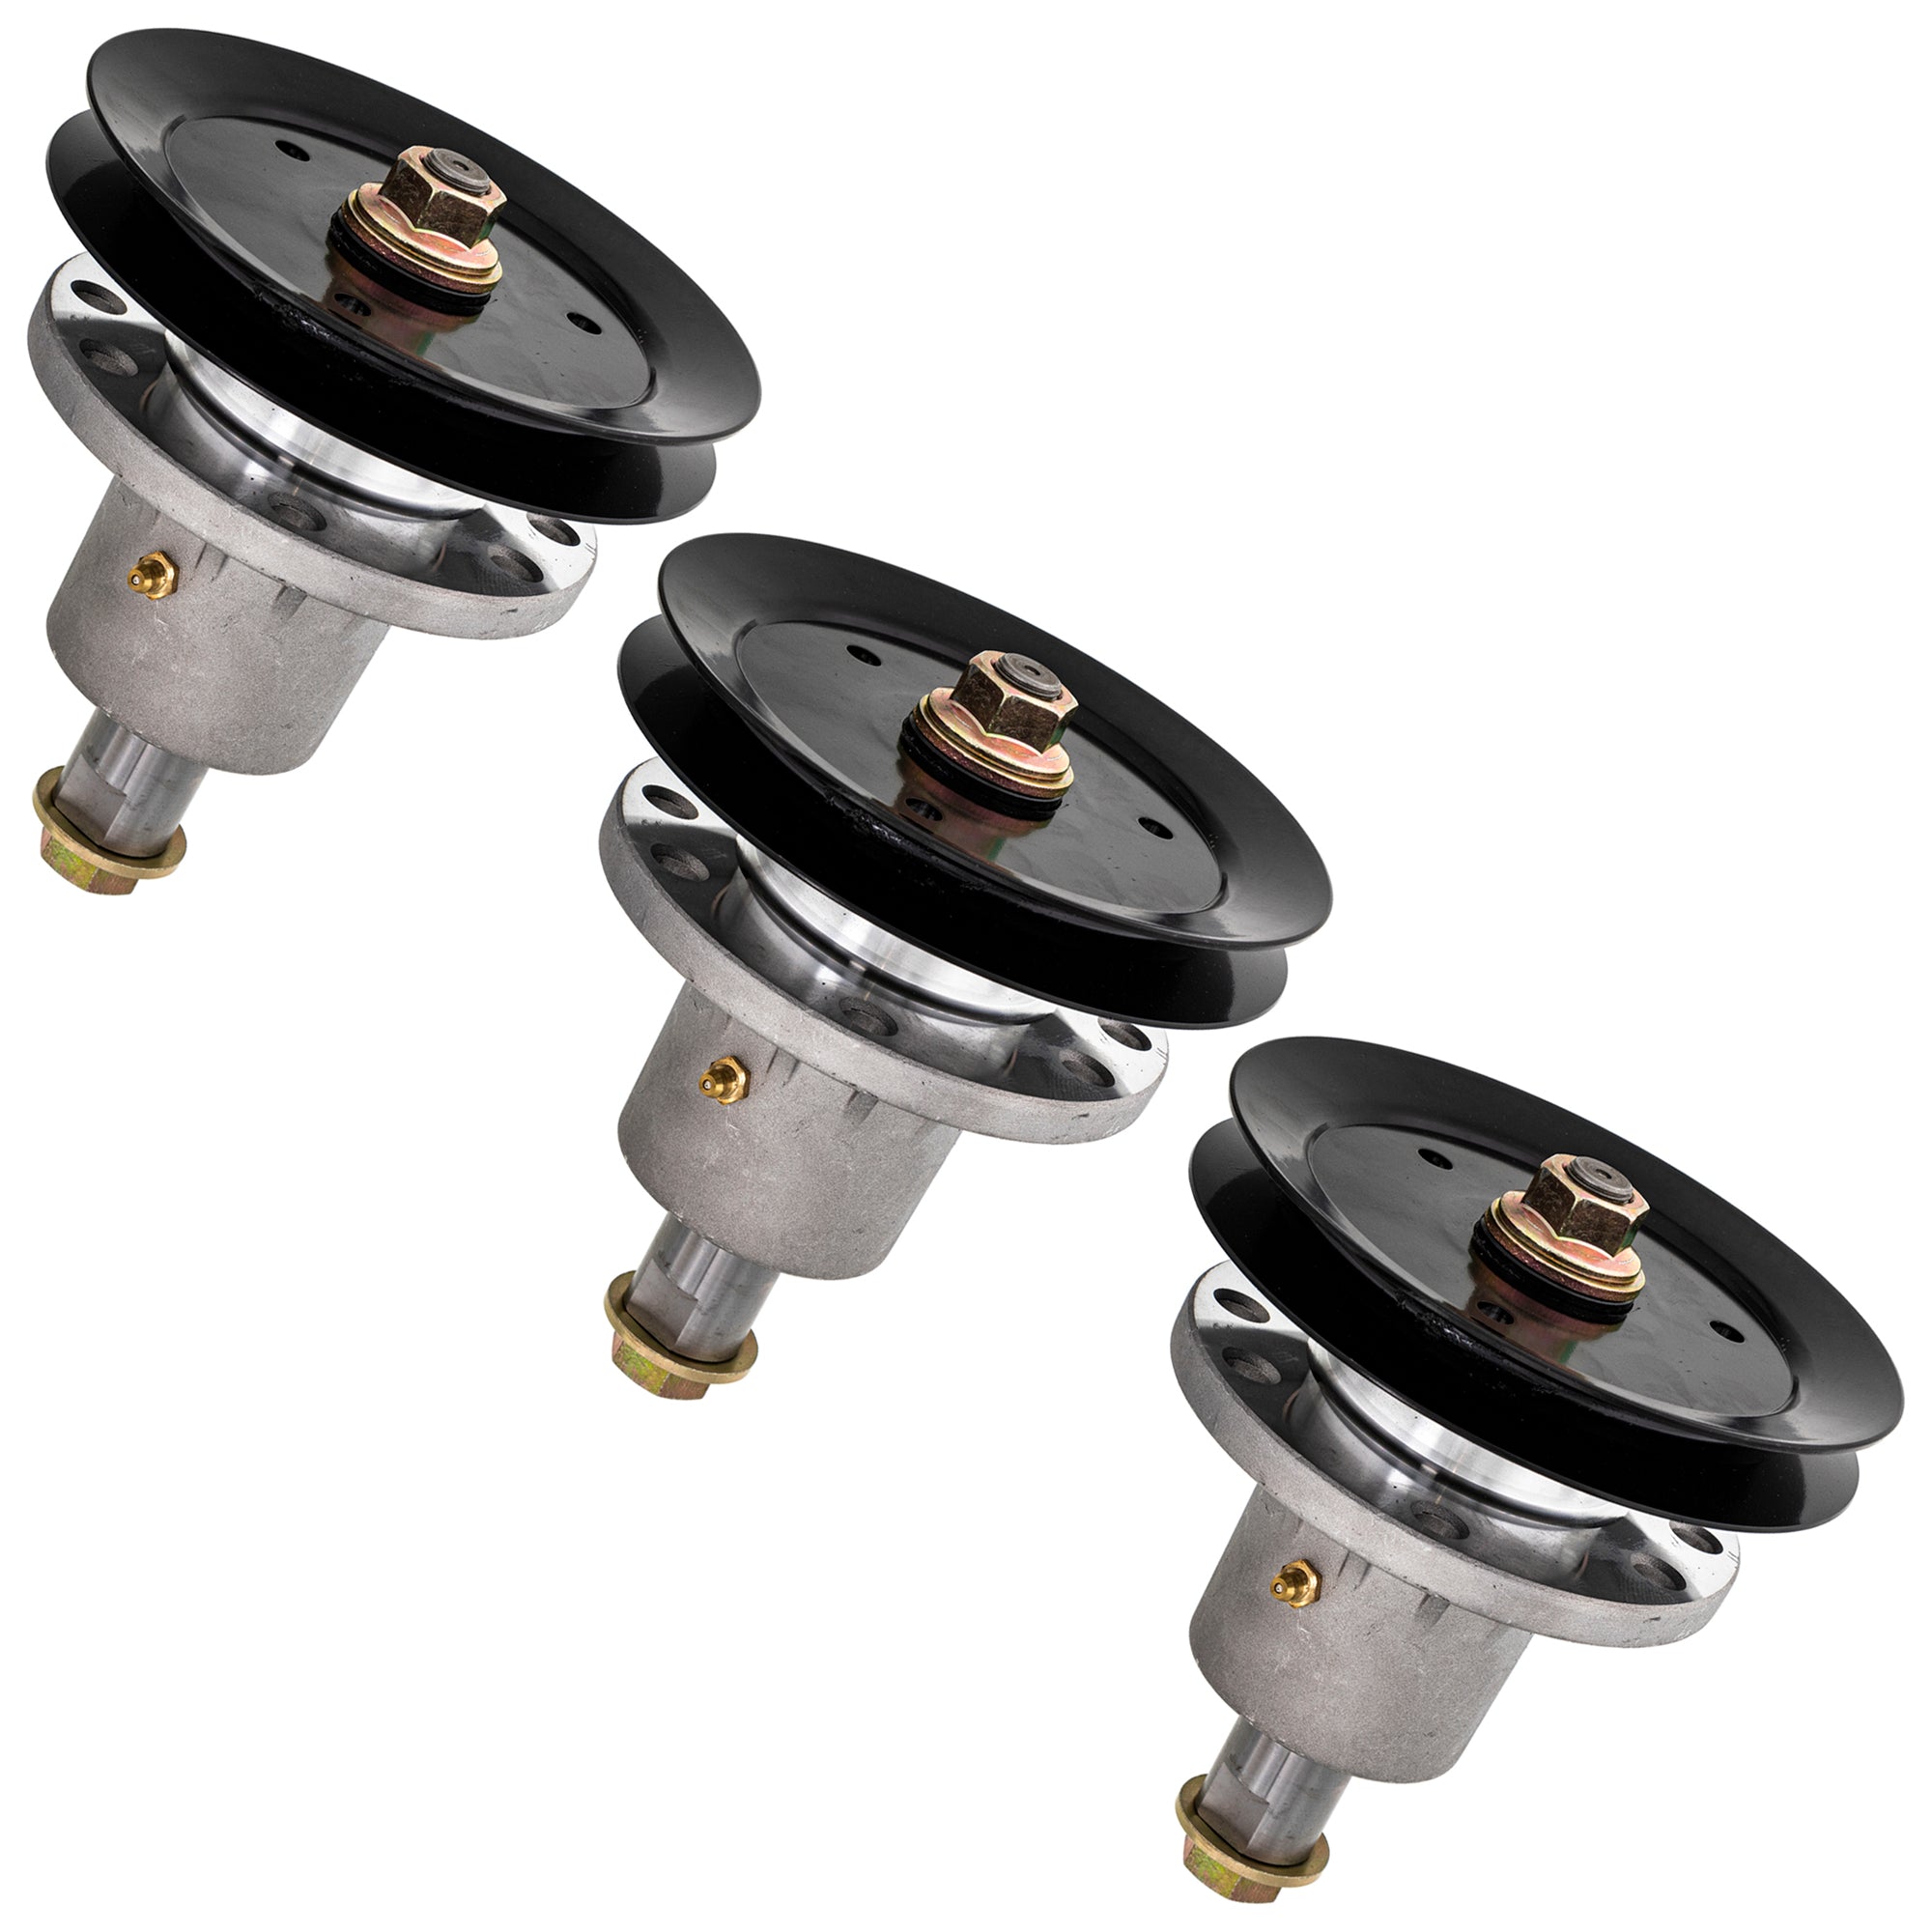 Deck Spindle with Pulley 3-Pack for Toro Exmark Stens Oregon Ferris Lazer 1-634972 285-795 8TEN 810-CSP2284N